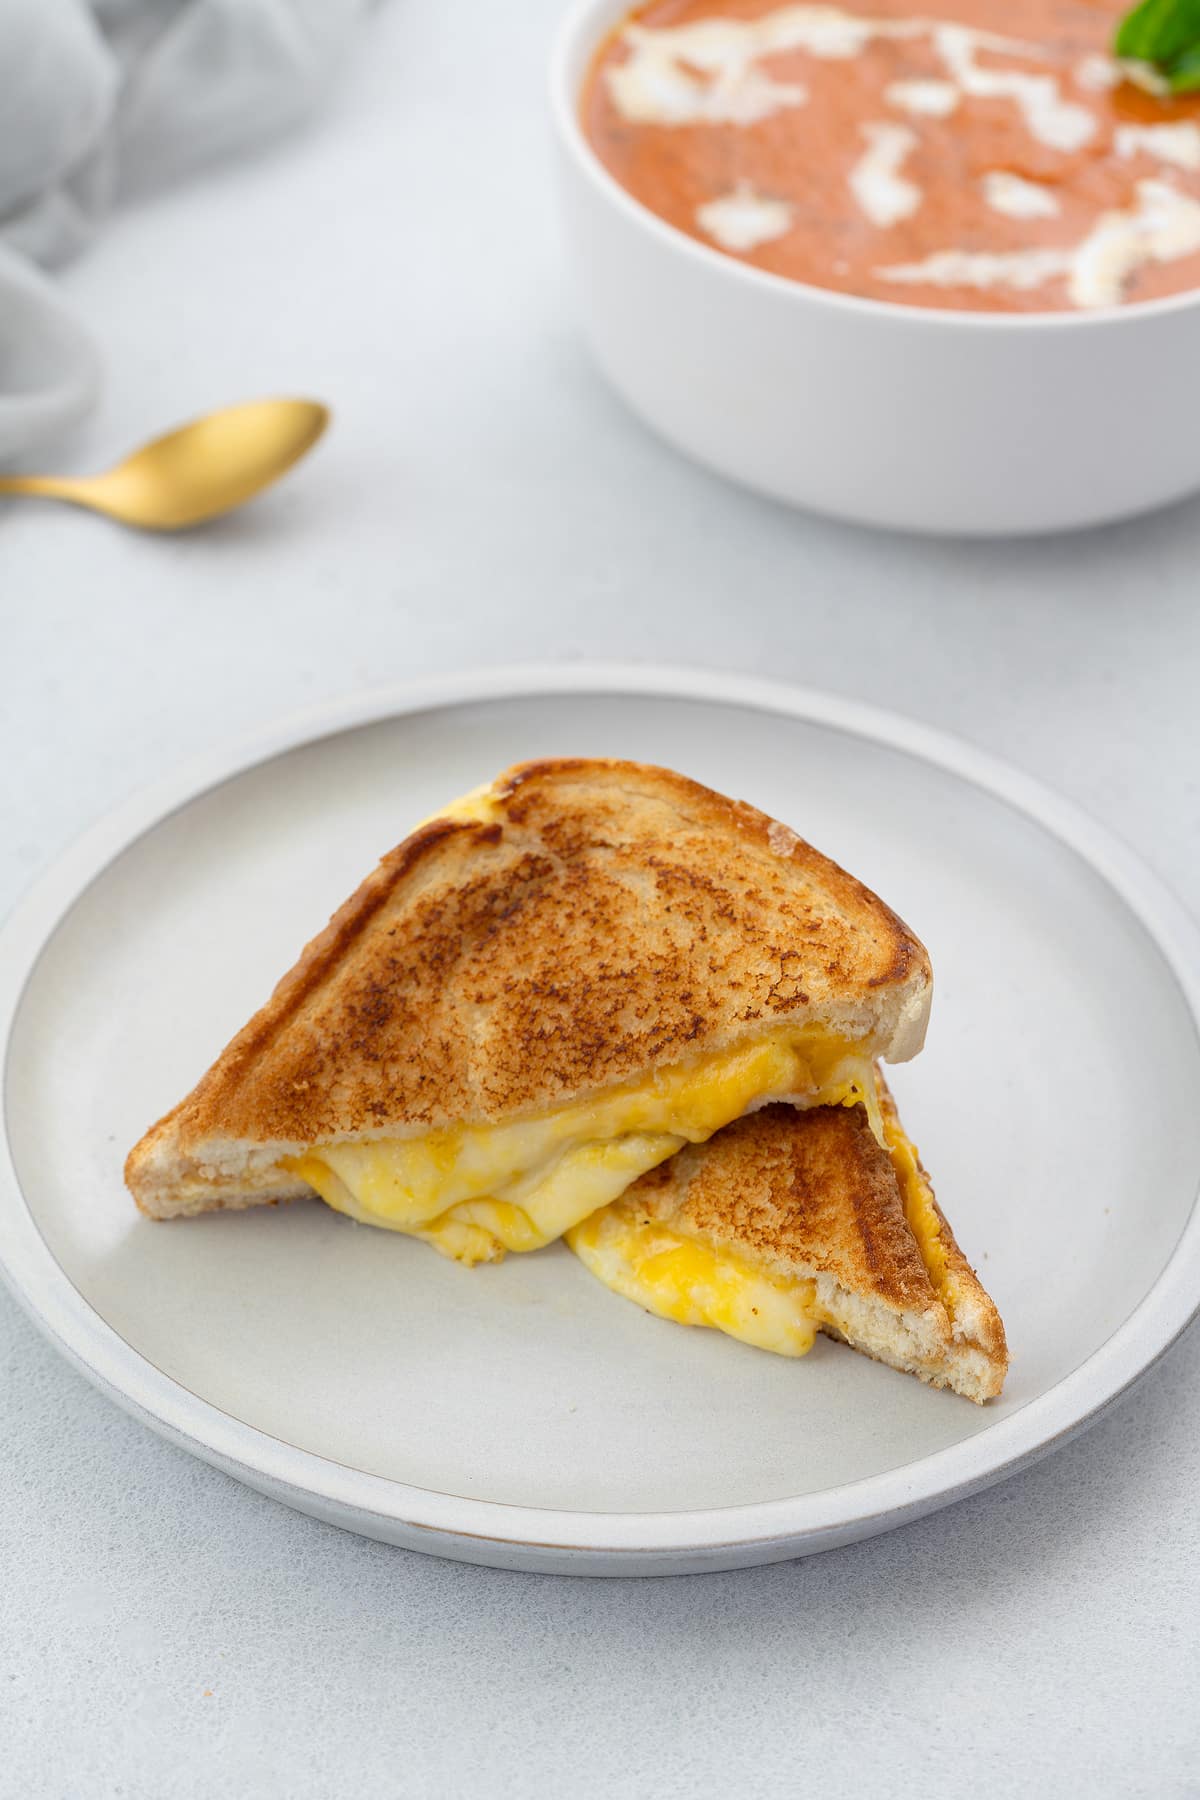 Grilled cheese sandwich in a white bowl on a table, with a golden spoon and a cup of tomato soup nearby.